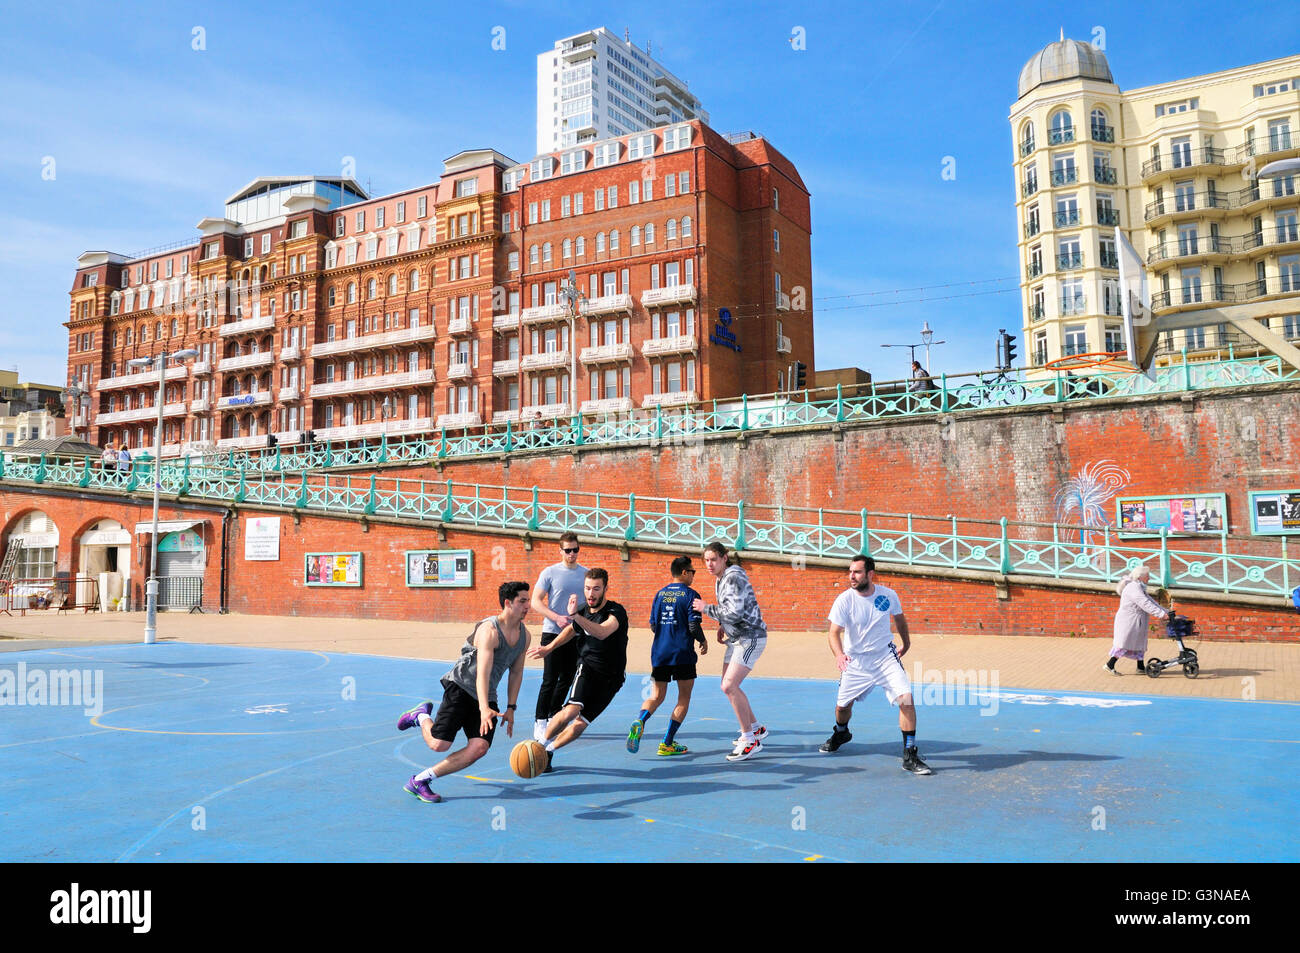 Basketball players on Brighton seafront, East Sussex, UK Stock Photo